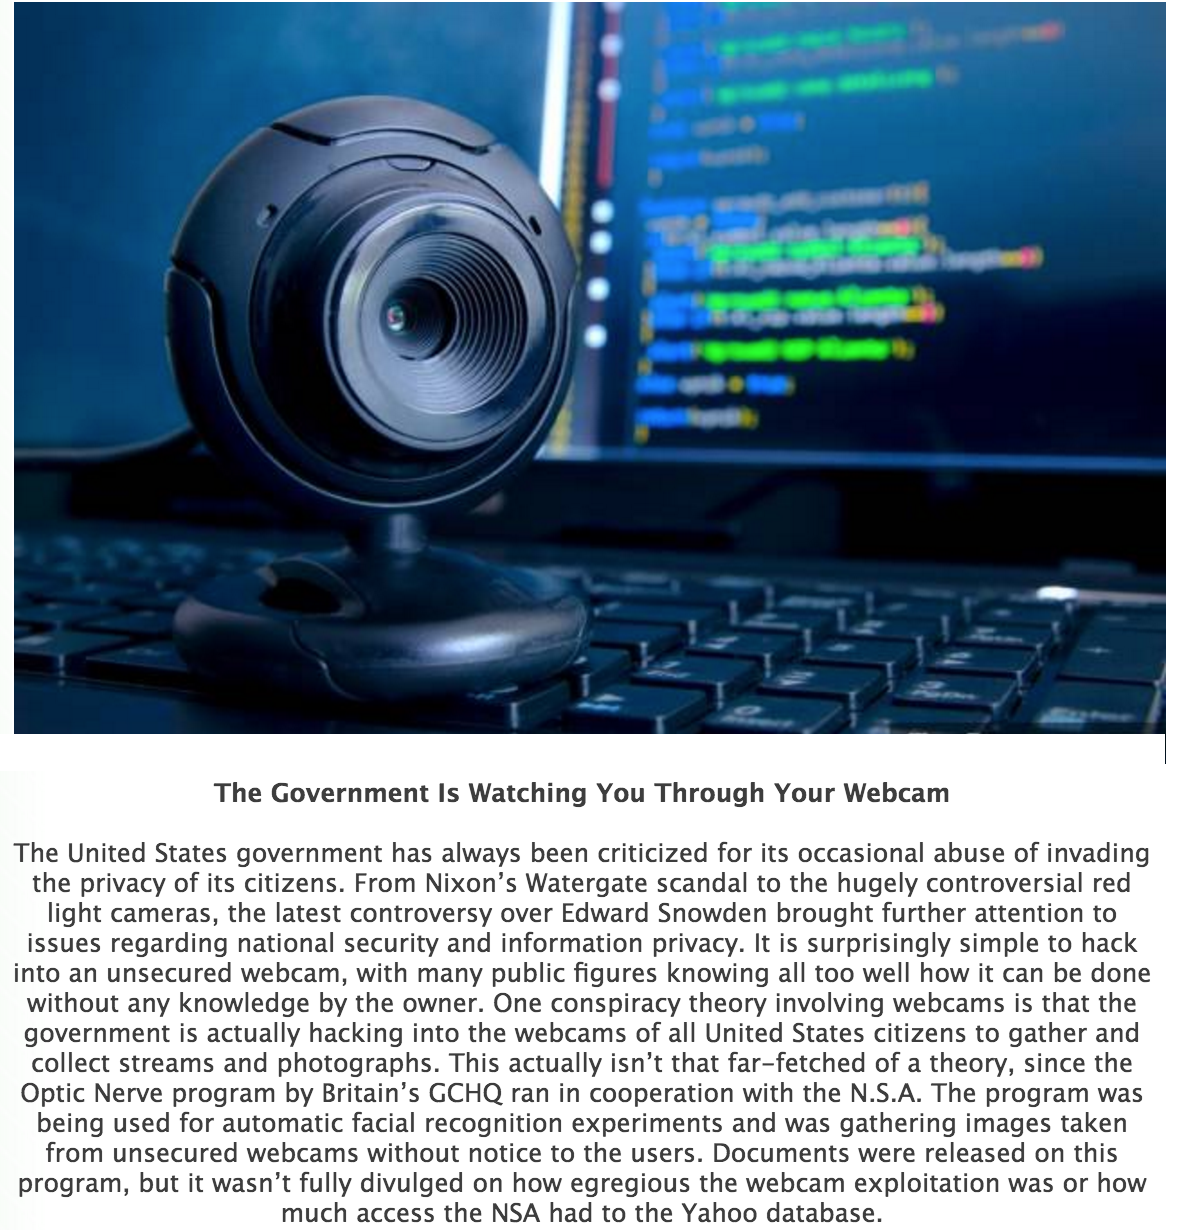 Camera - The Government is Watching You Through Your Webcam The United States government has always been criticized for its occasional abuse of invading the privacy of its citizens. From Nixon's Watergate scandal to the hugely controversial red light came